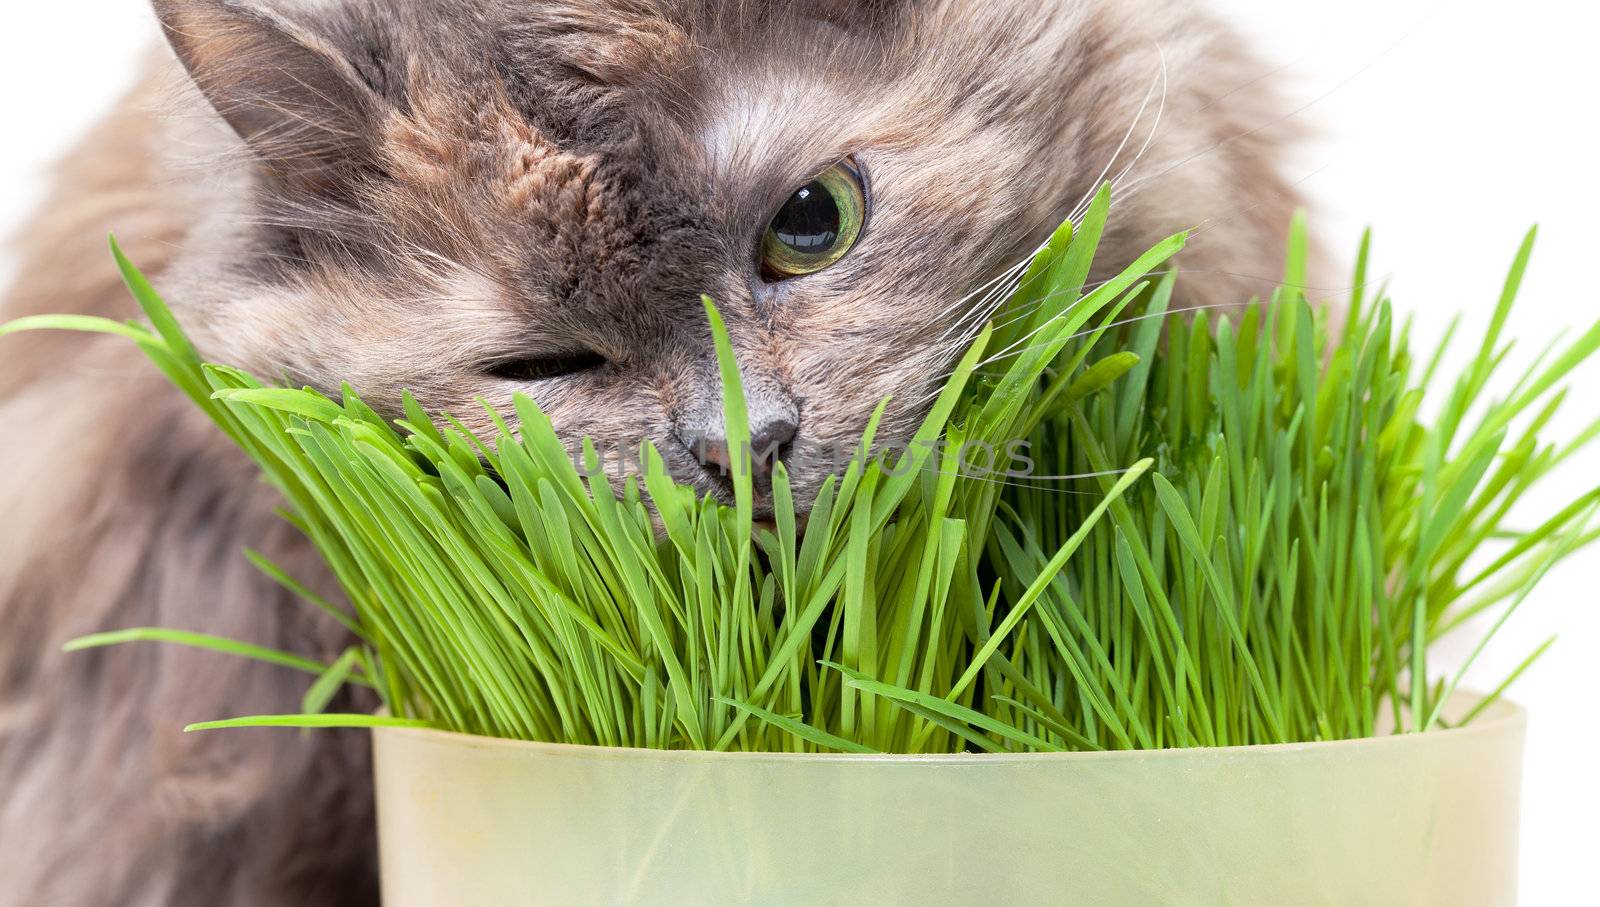 A pet cat eating fresh grass, on a white background.